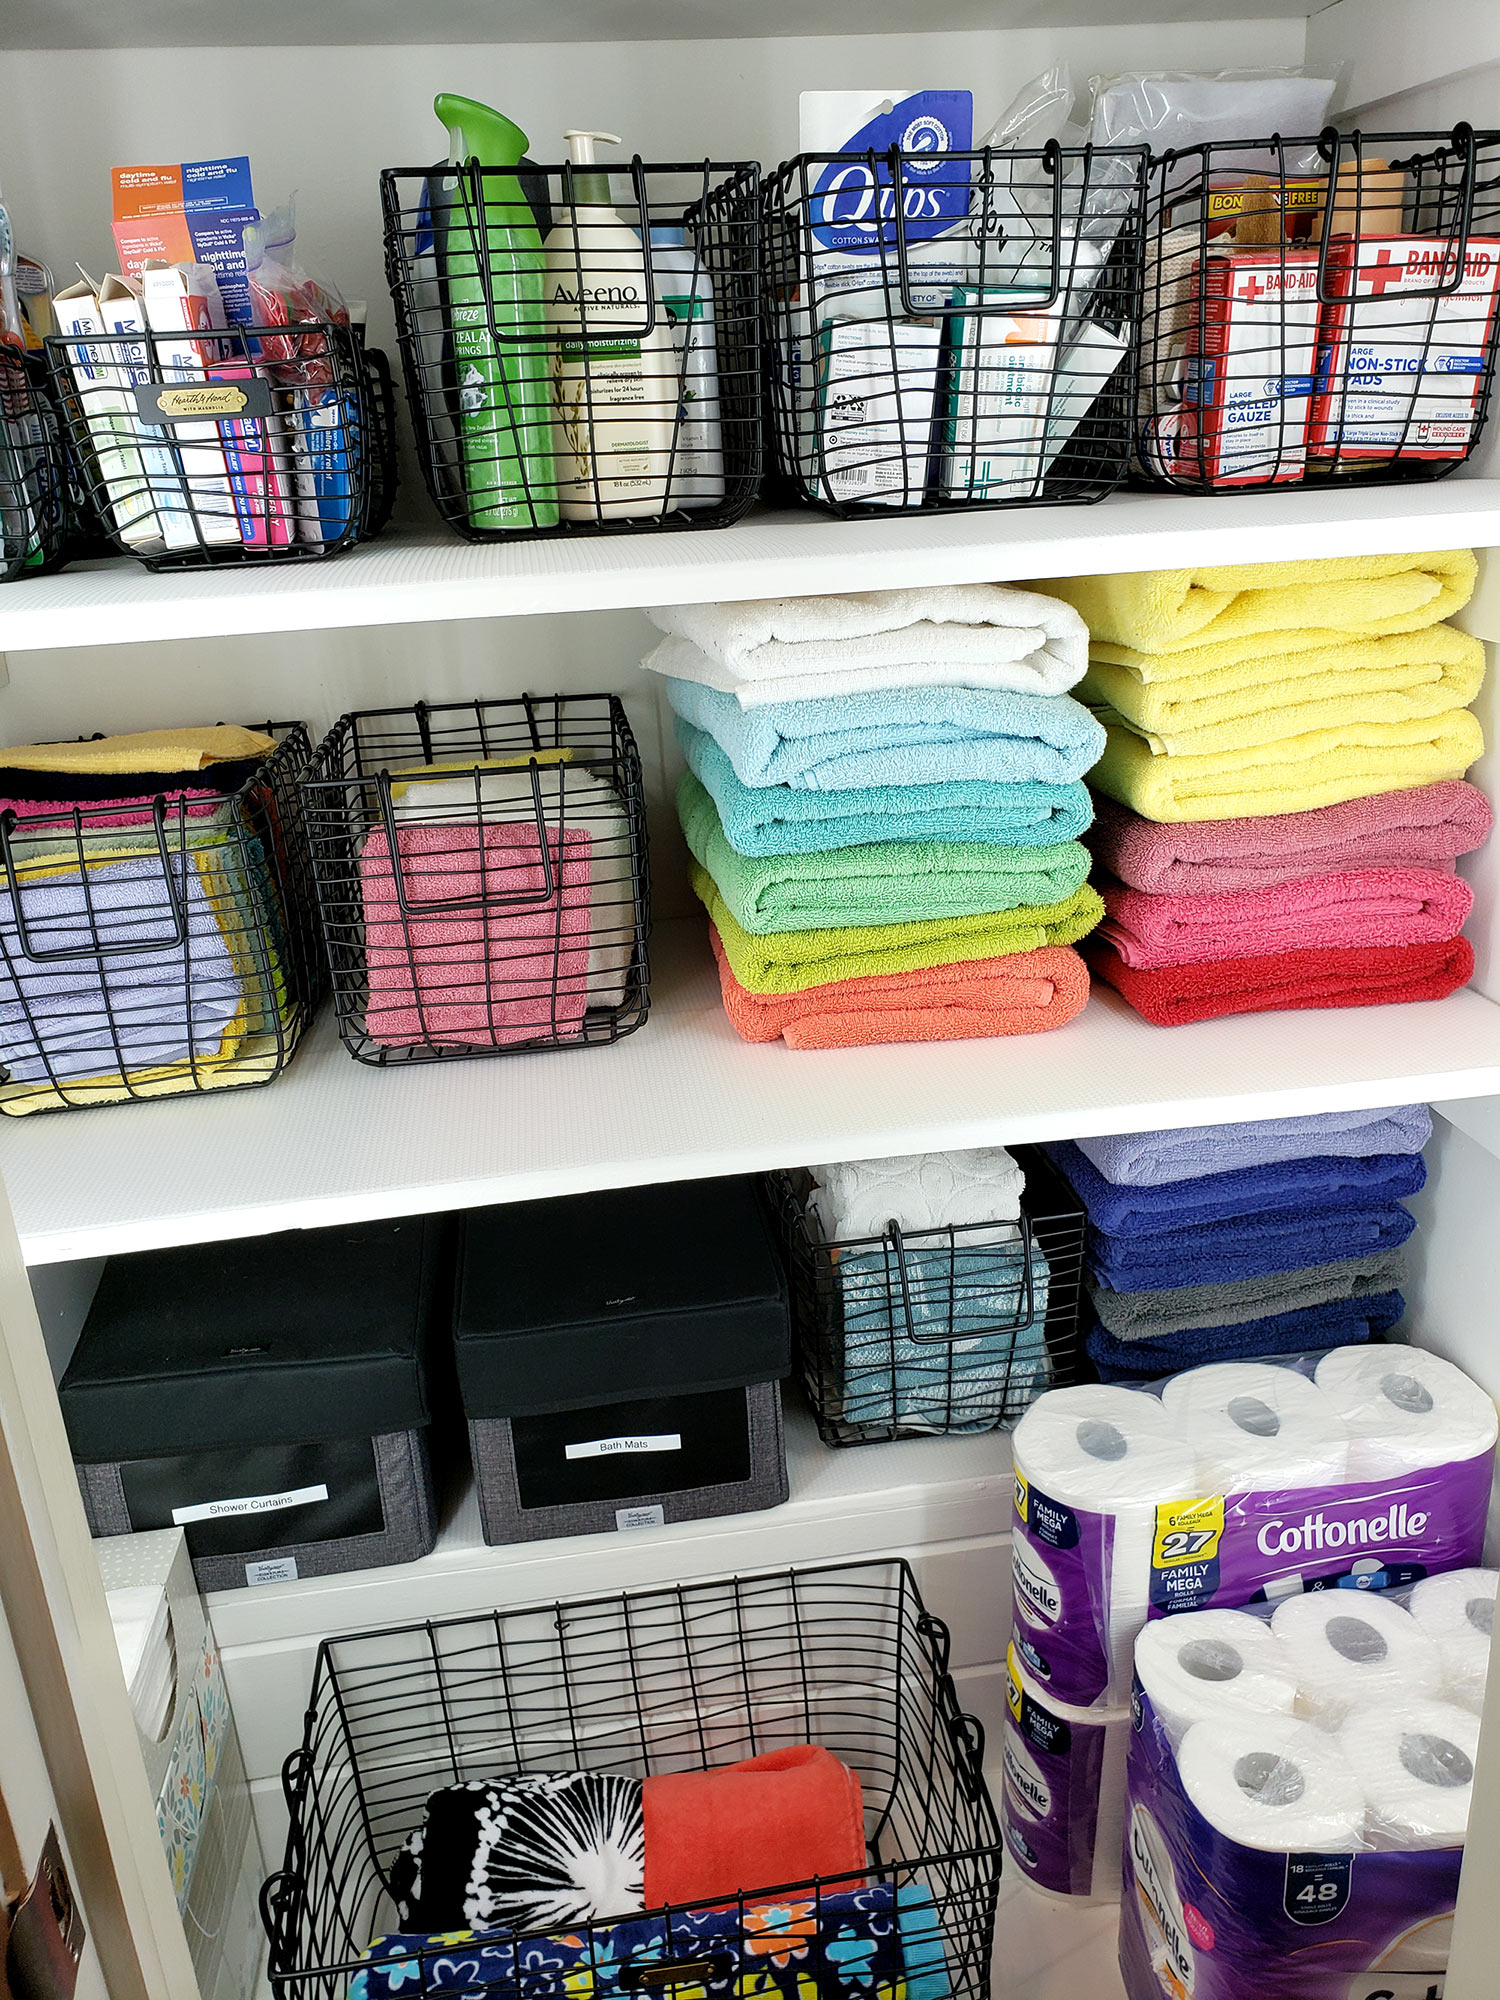 We unfolded and looked at each one, setting aside any that were looking old and ratty.   Again, she decided on how many sets of towels based on the number of people in her family and regular guests.  The towels that did not make the cut were donated to  the local animal shelter.